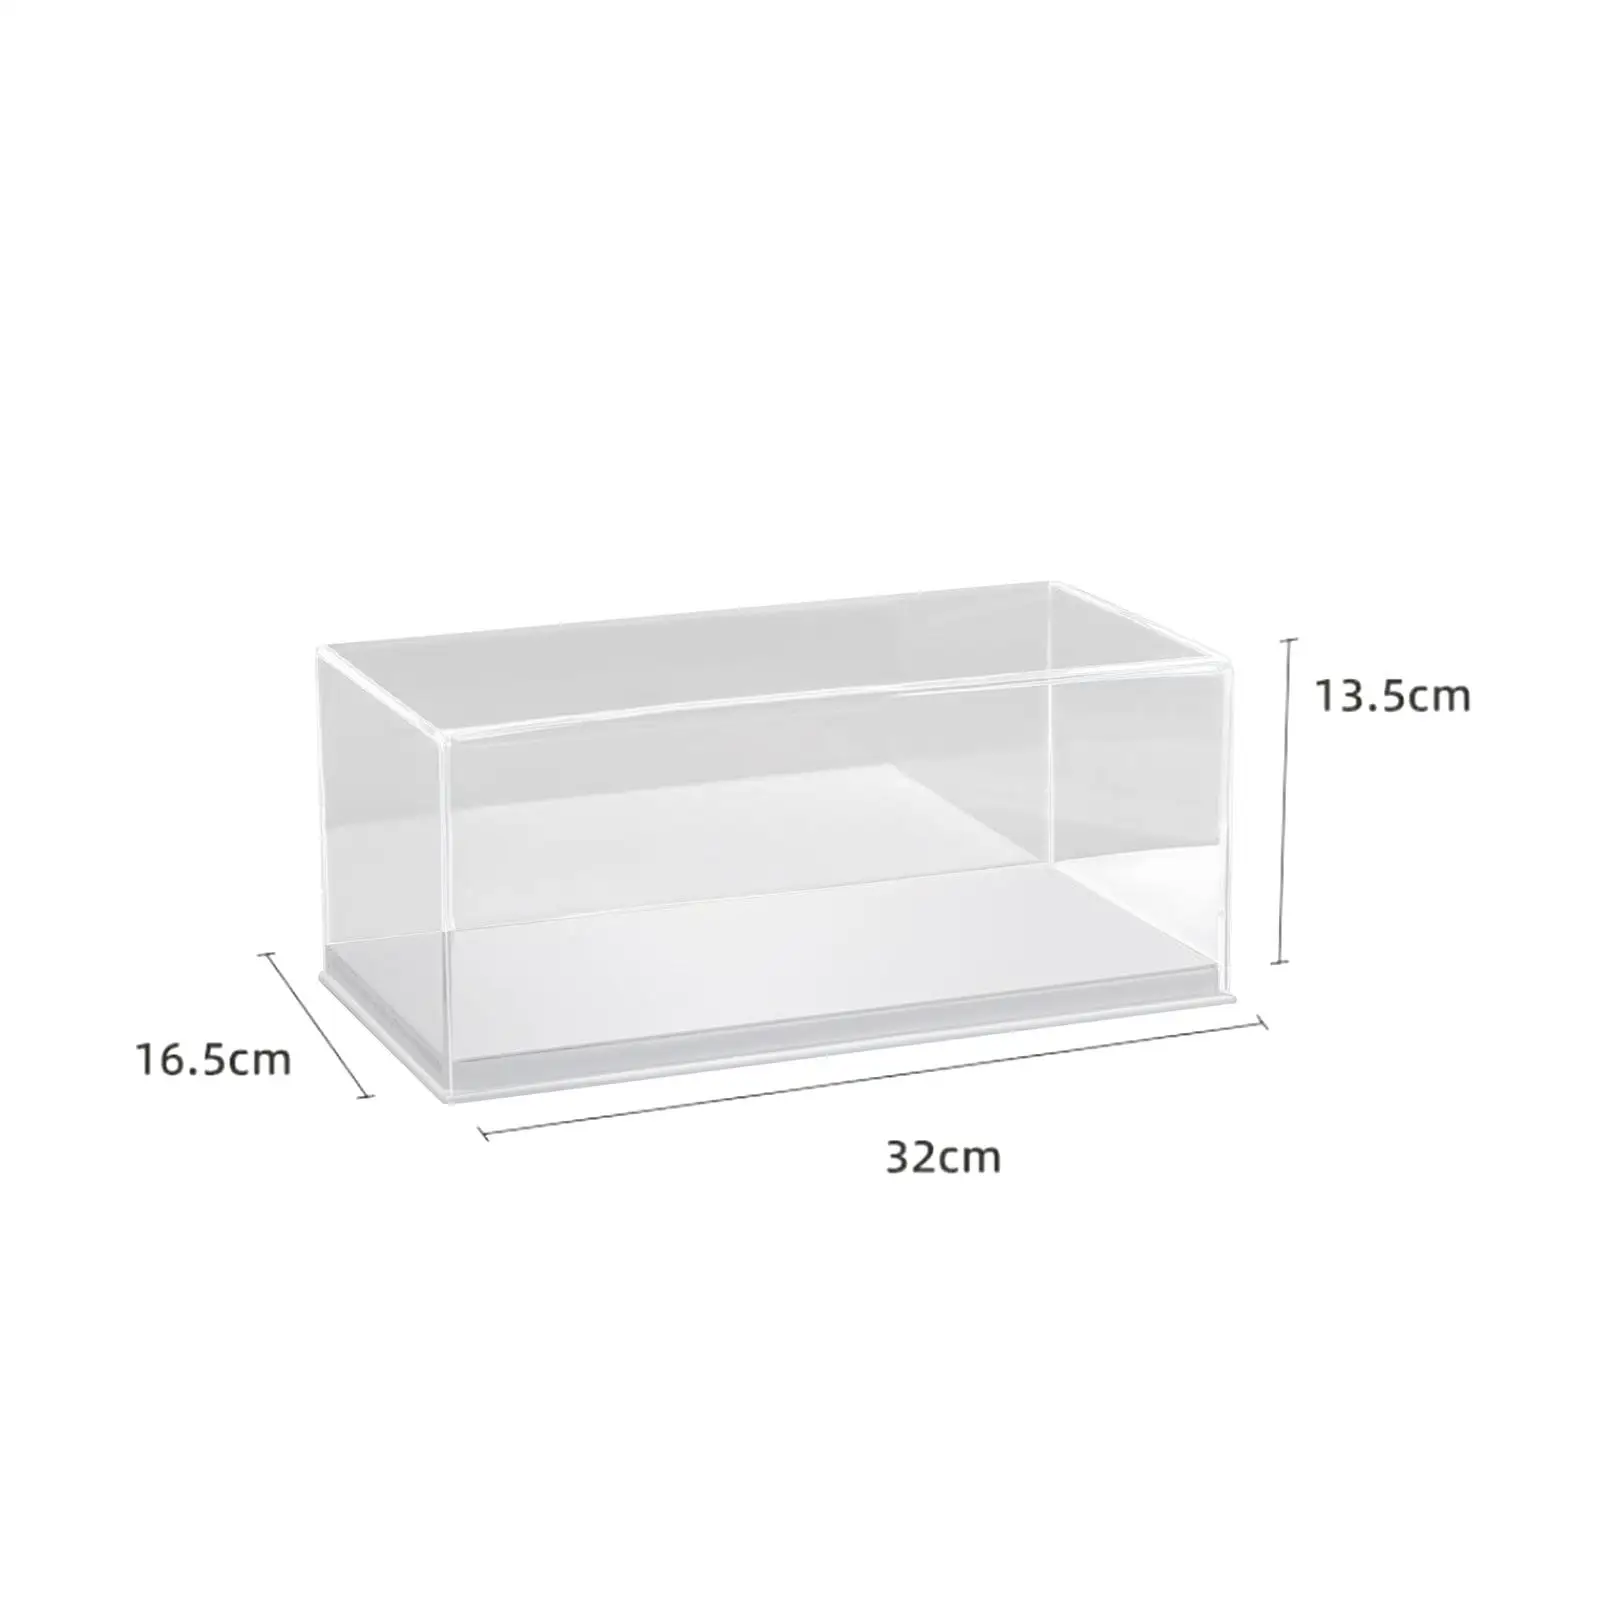 Acrylic Clear Display Case for 1:64 Scale Model Cars for Miniature Figurines